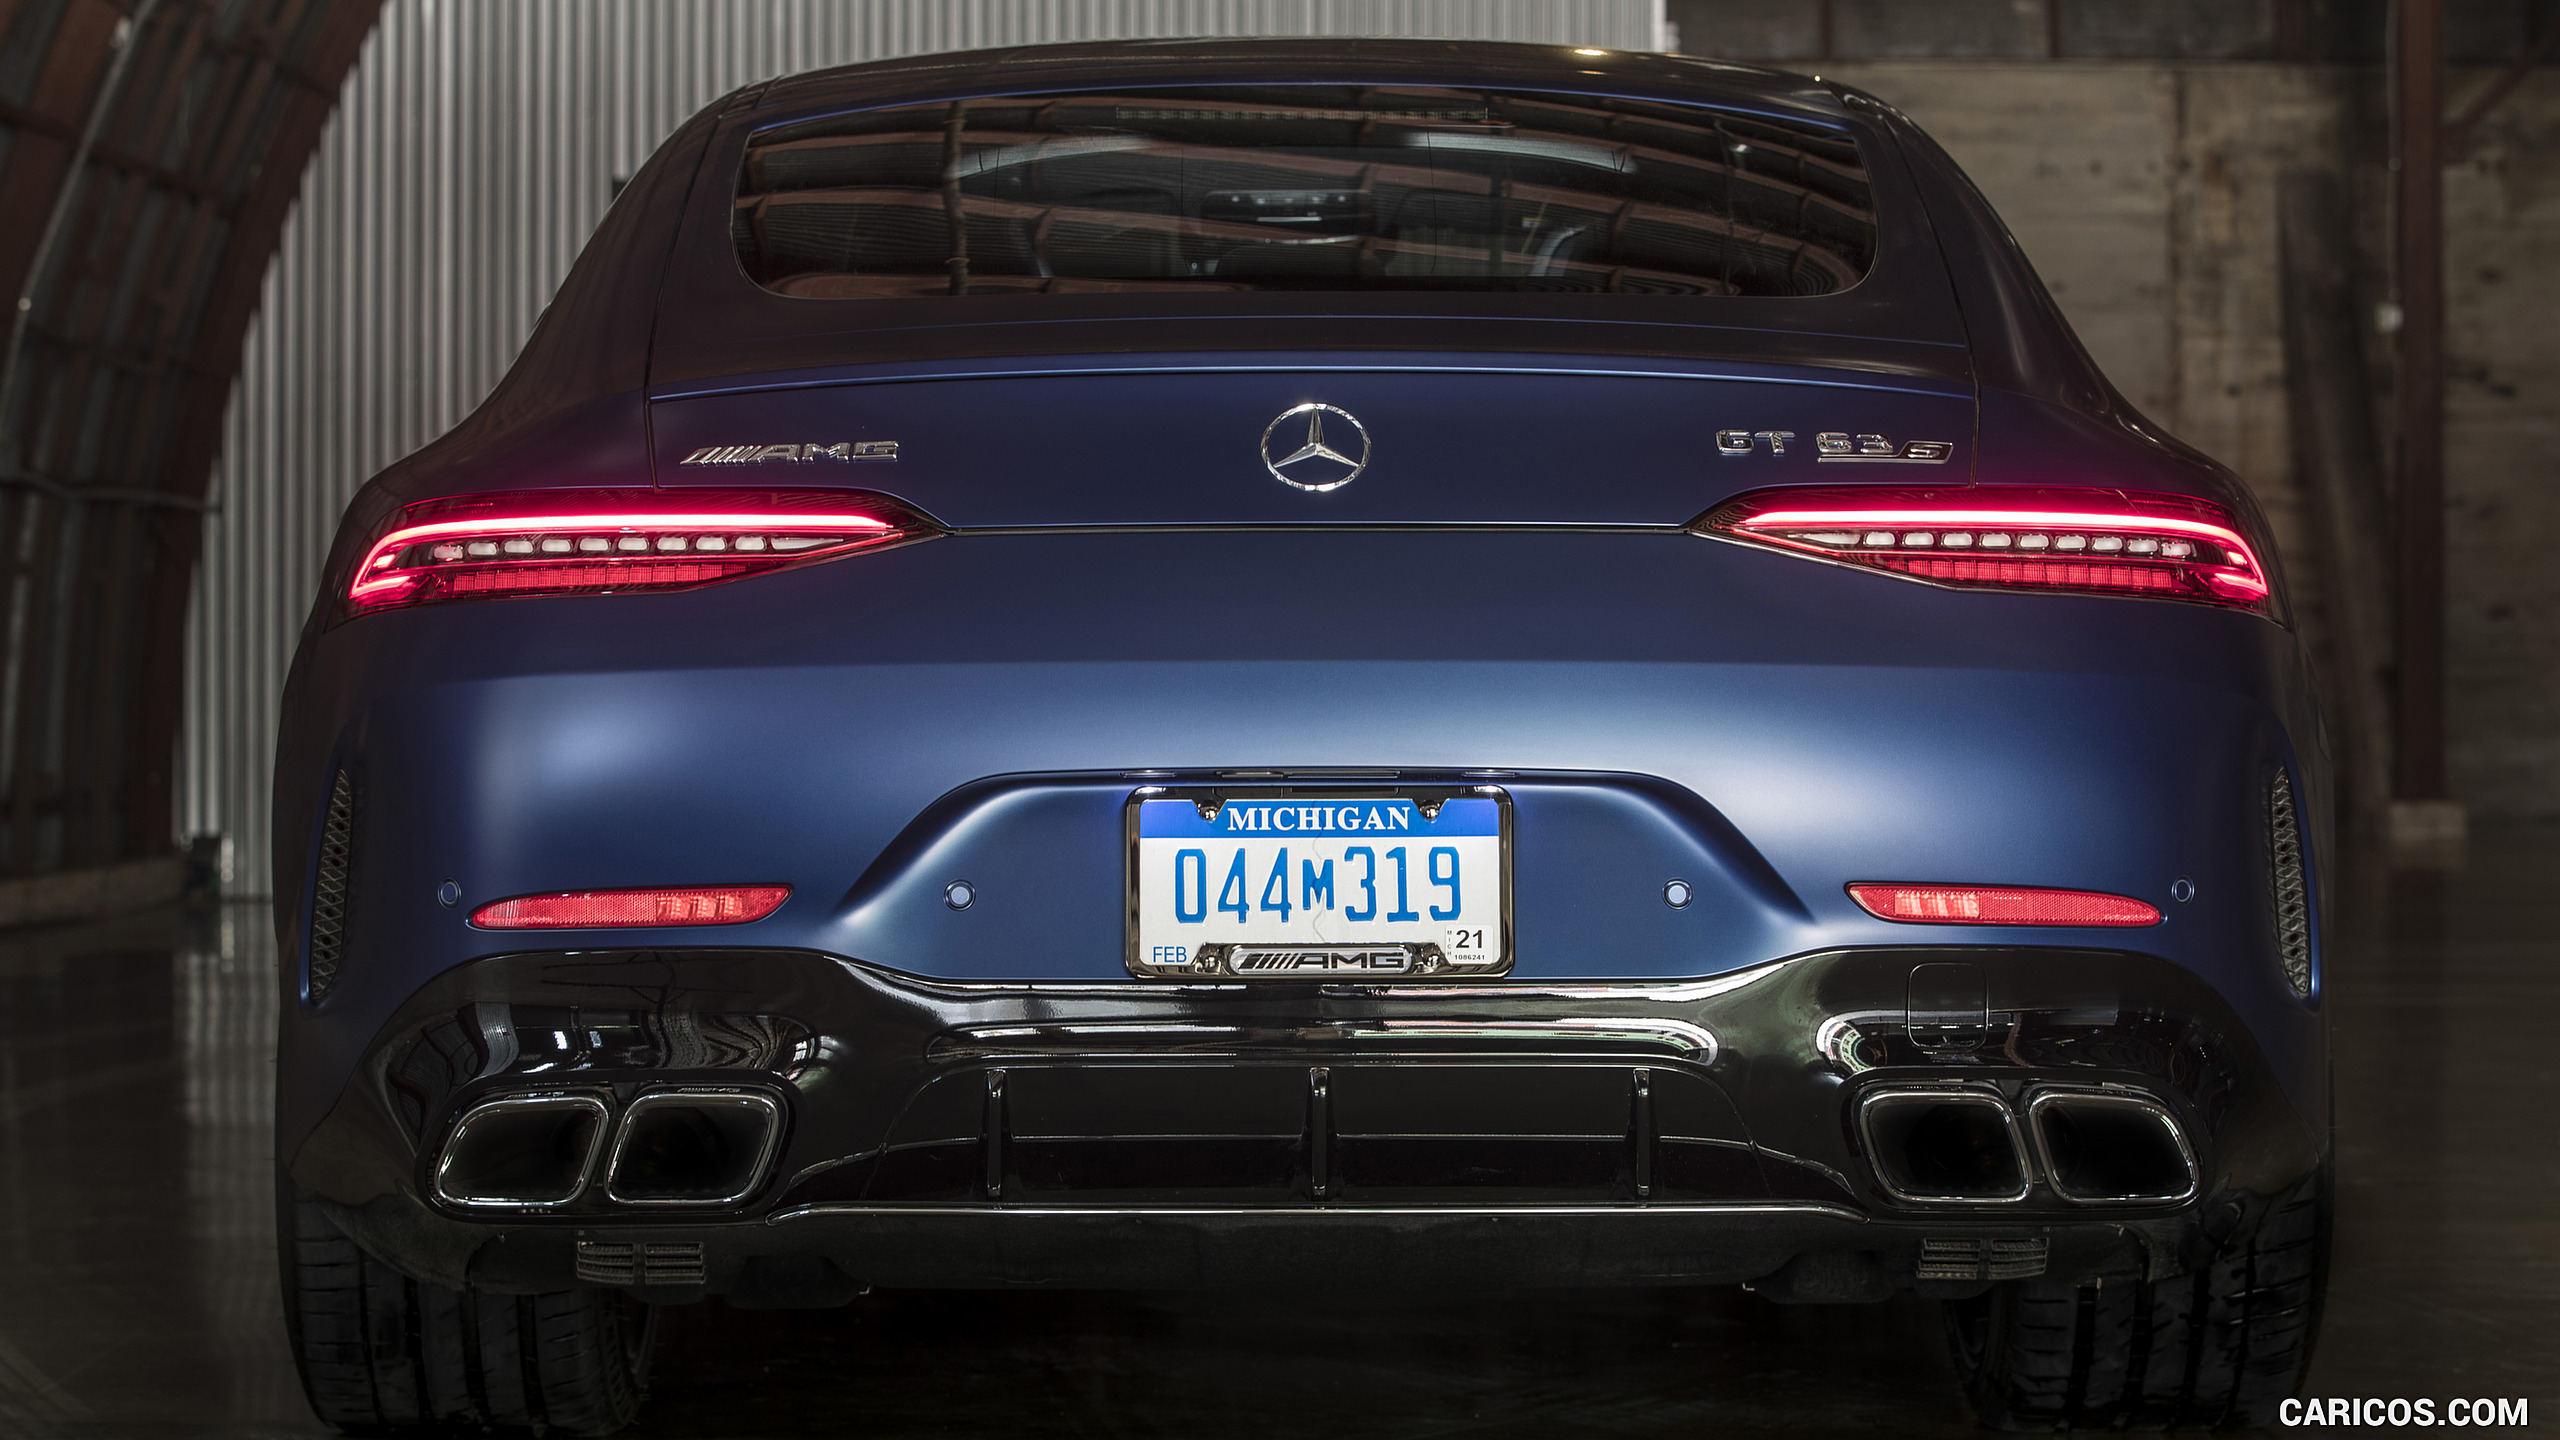 2019 Mercedes-AMG GT 63 S 4MATIC+ 4-Door Coupe - Rear, #141 of 427